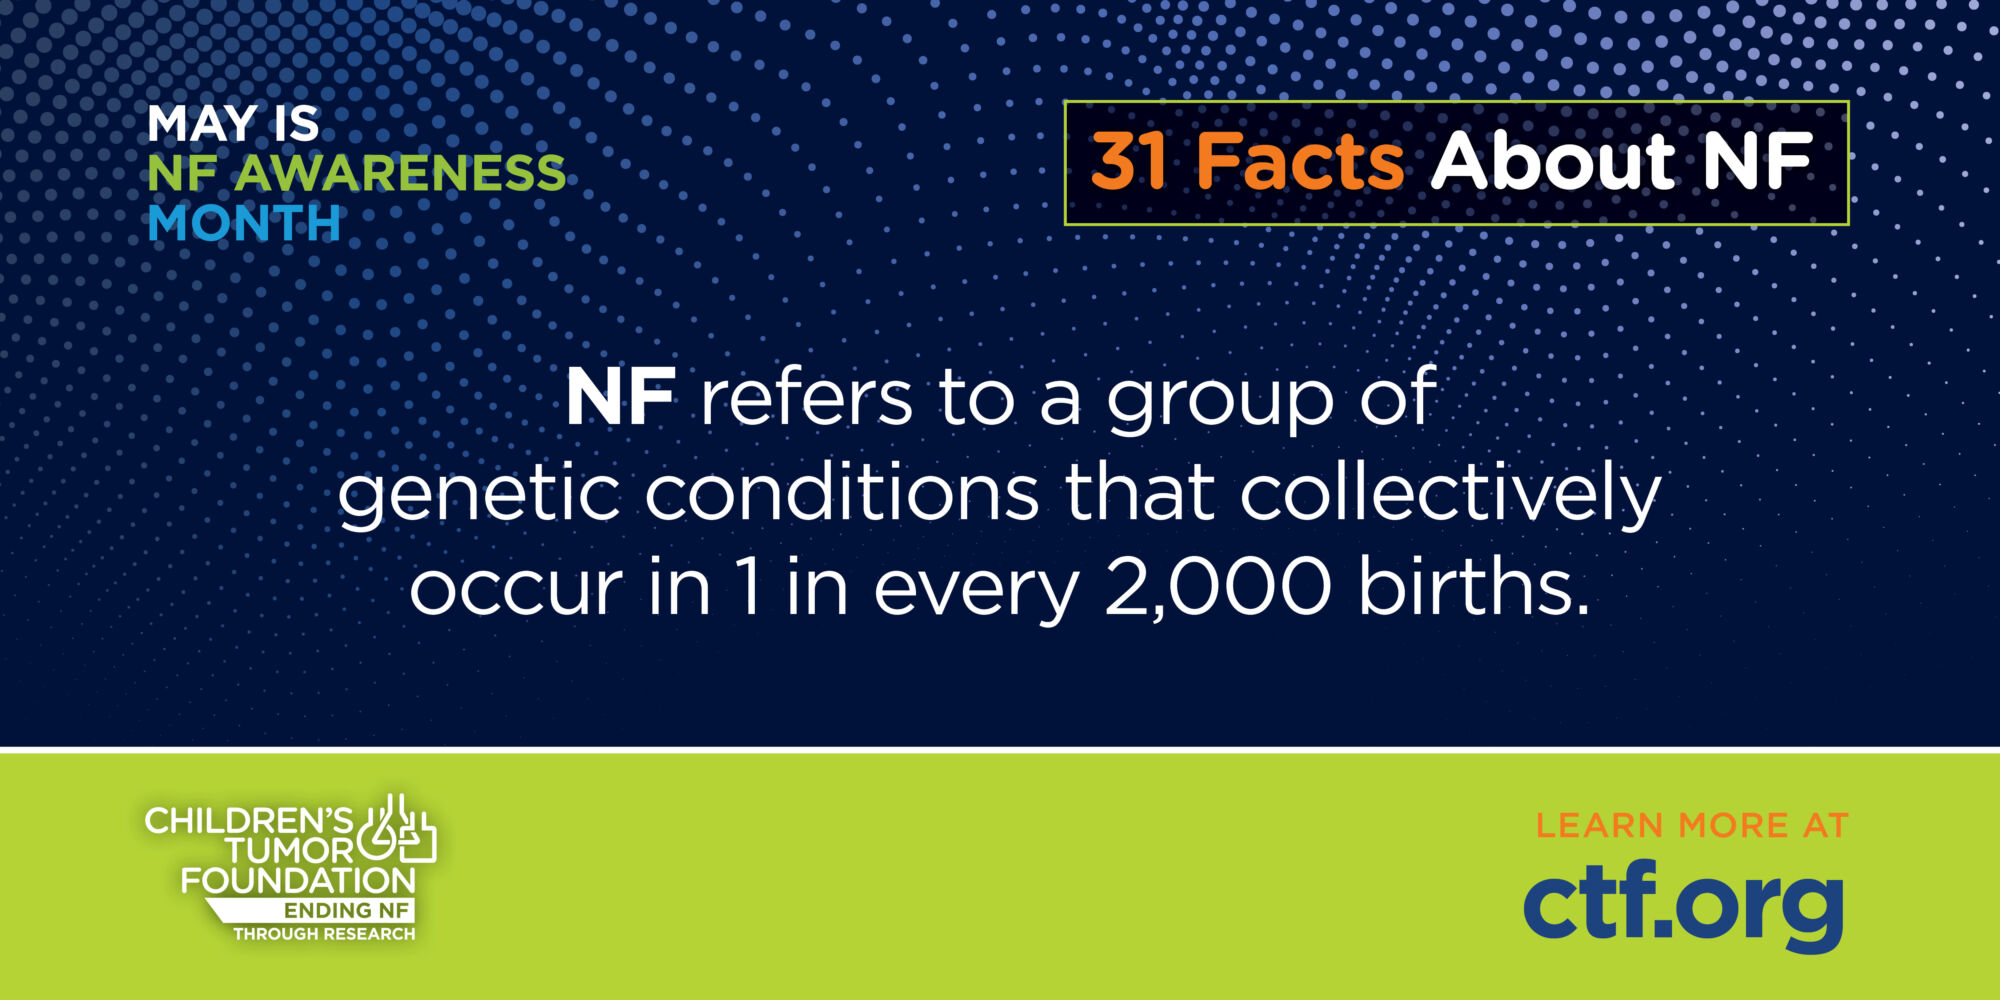 May is nf awareness month: highlighting neurofibromatosis with 31 facts, a genetic condition affecting 1 in 2,000 births. visit ctf.org for more information.